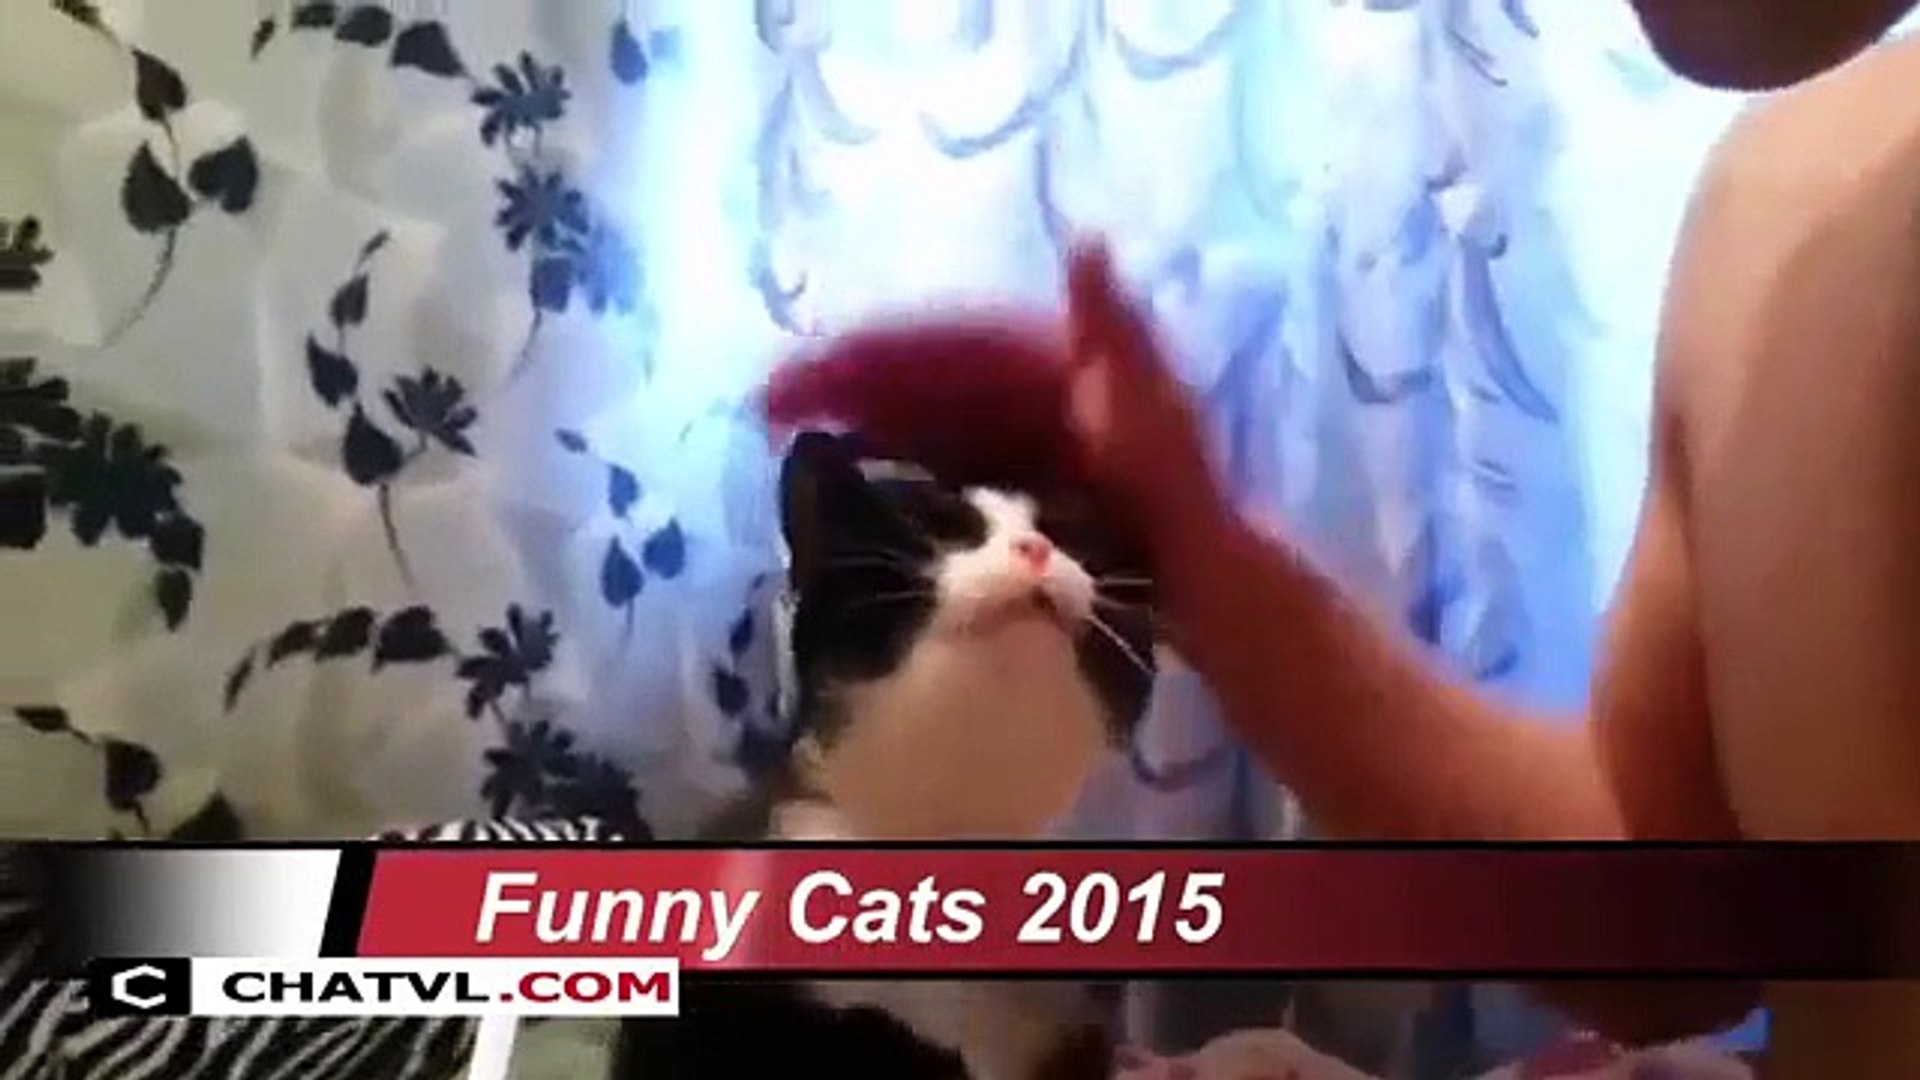 Funny cats compilation - Funny cat videos